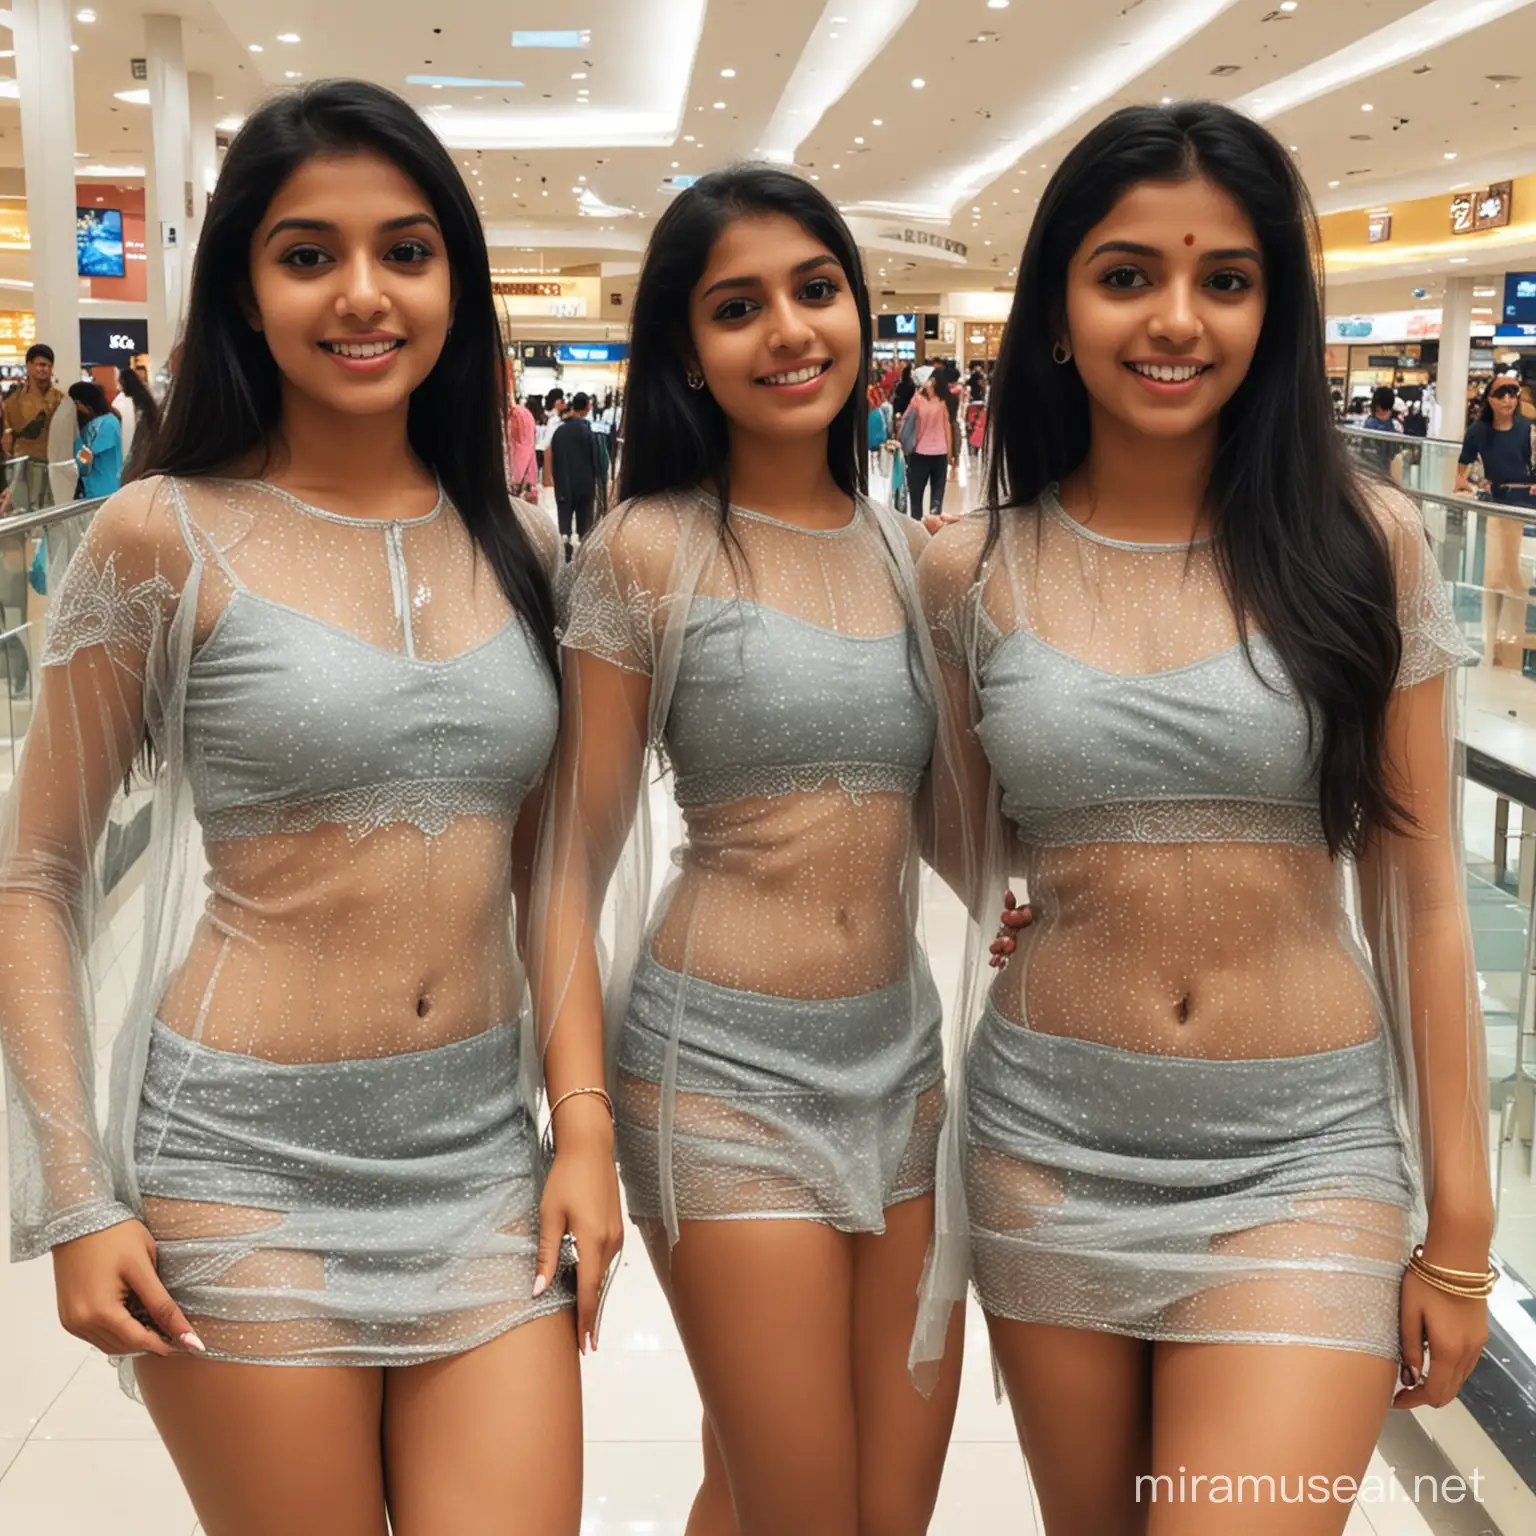 3 indian girls wering  see-through dress in mall